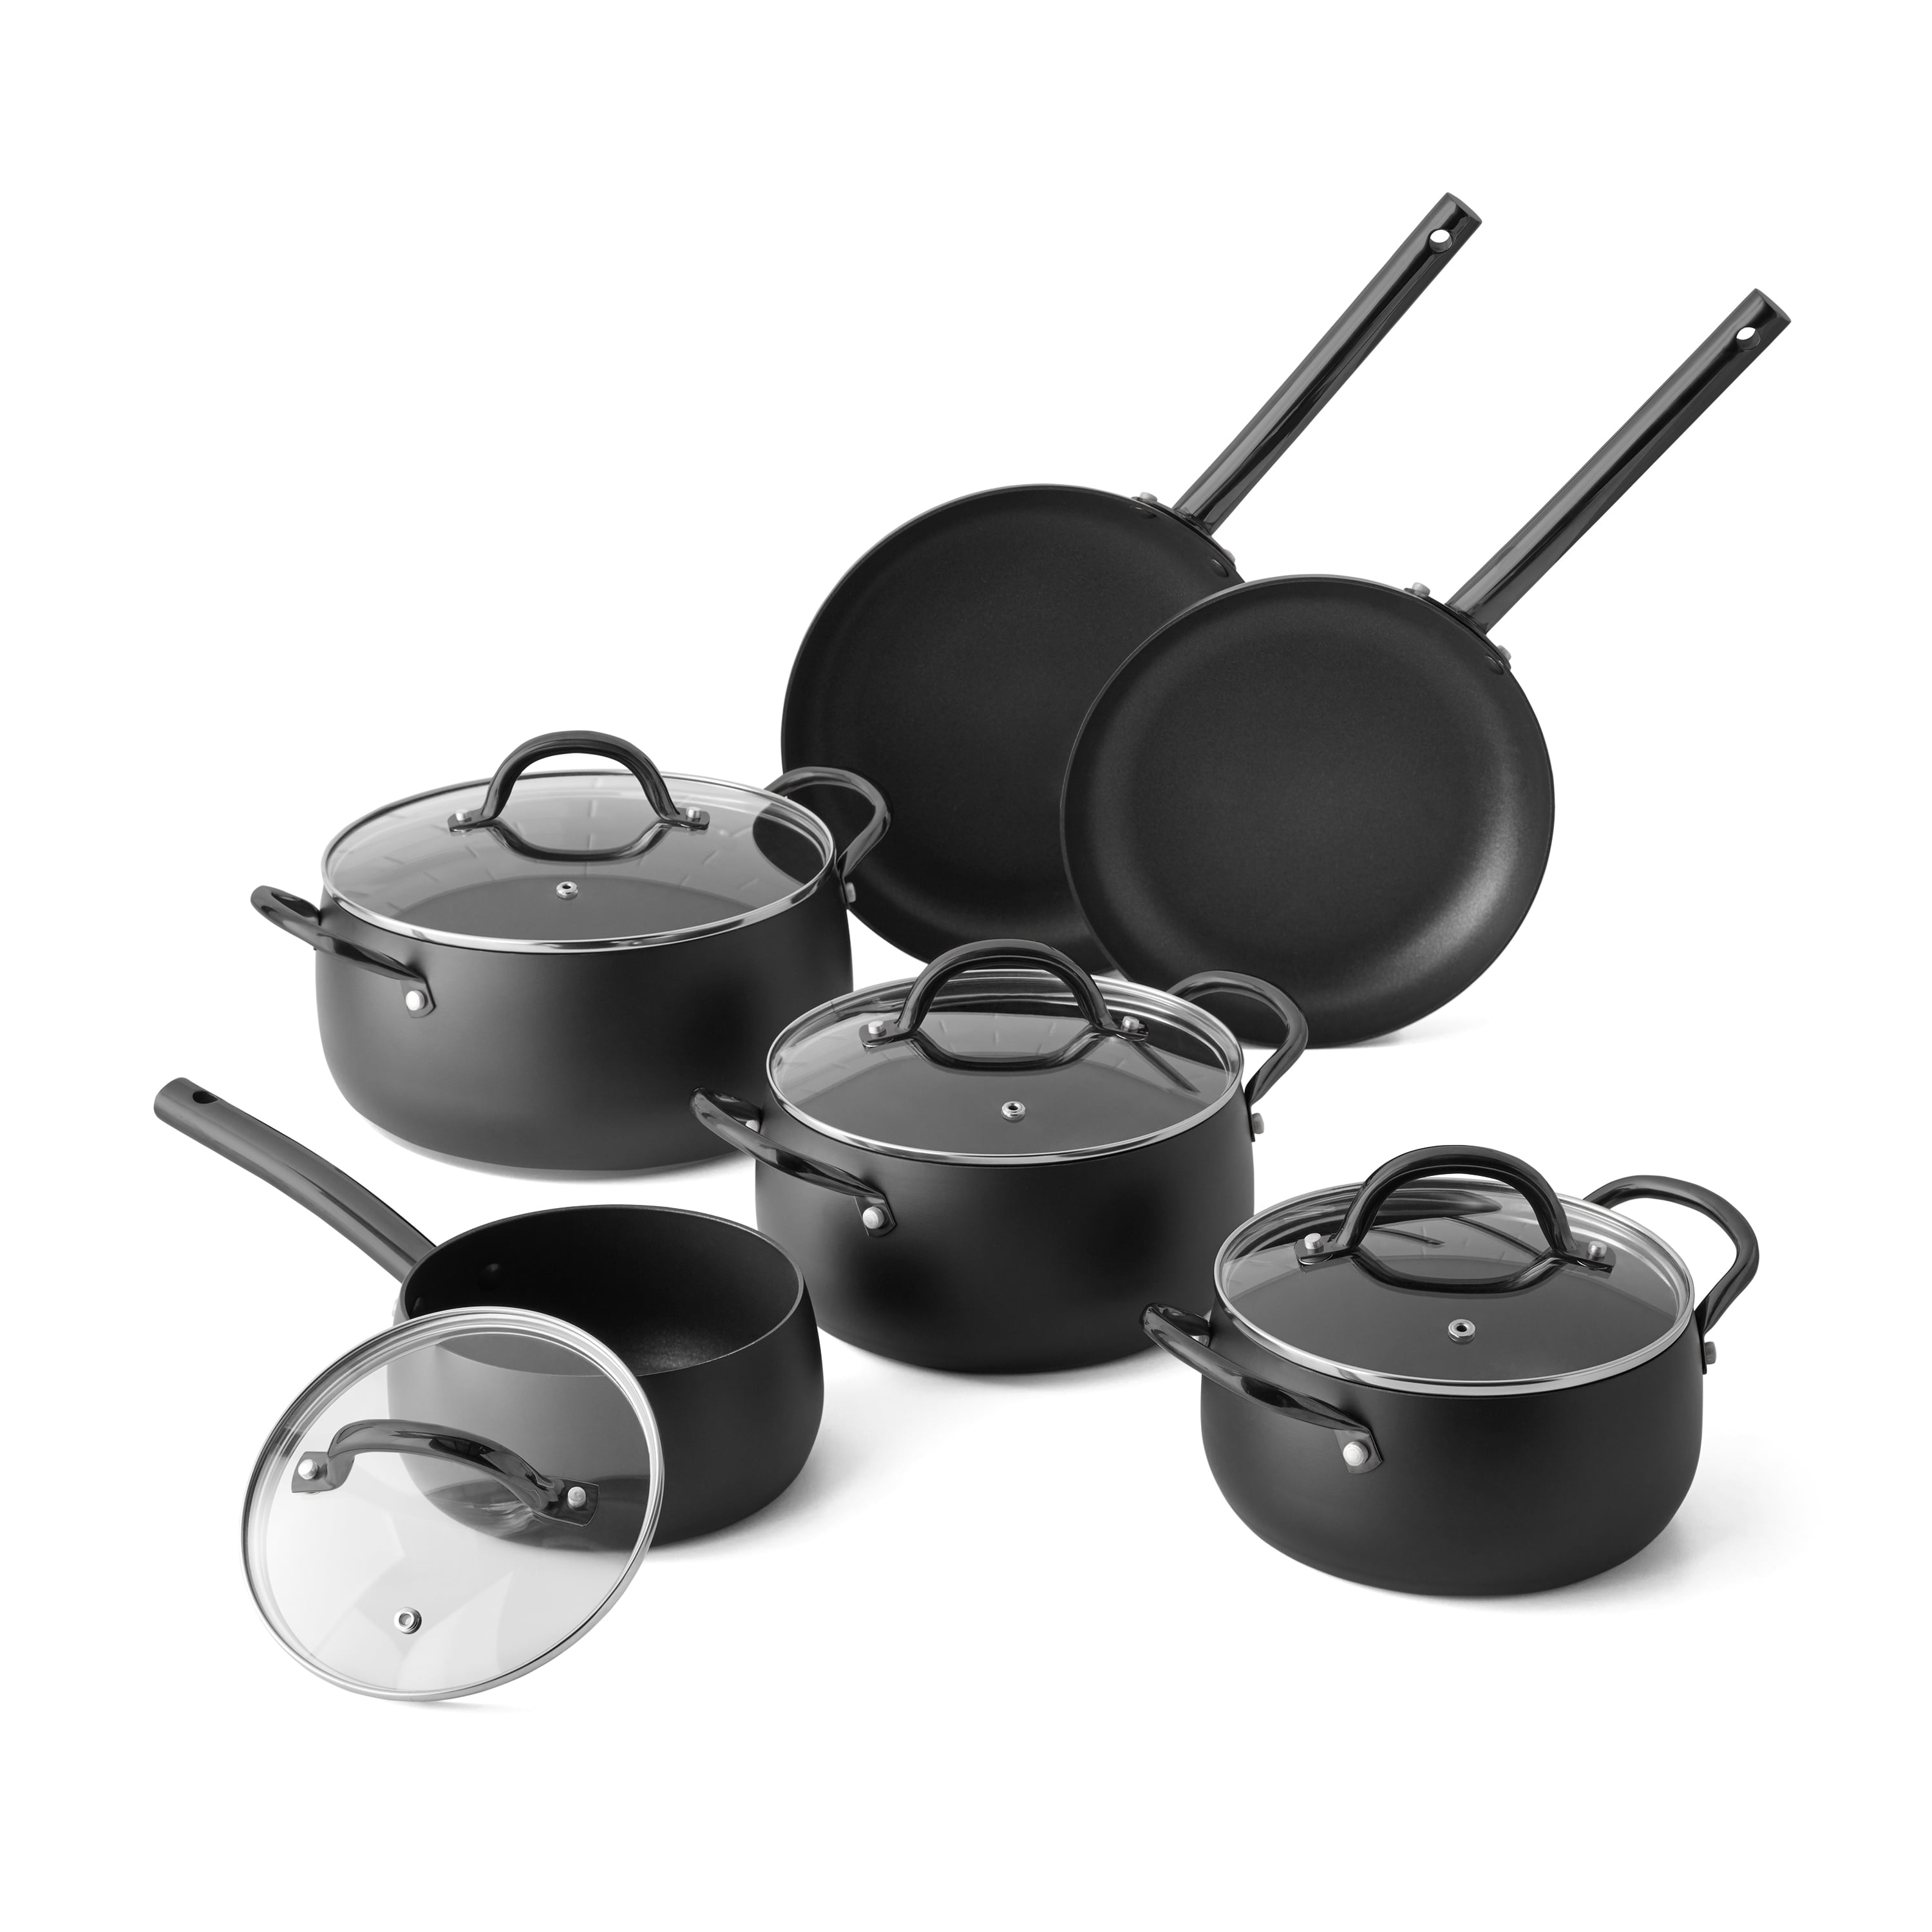 Mainstays 10-Piece Cookware Set, Stainless Steel